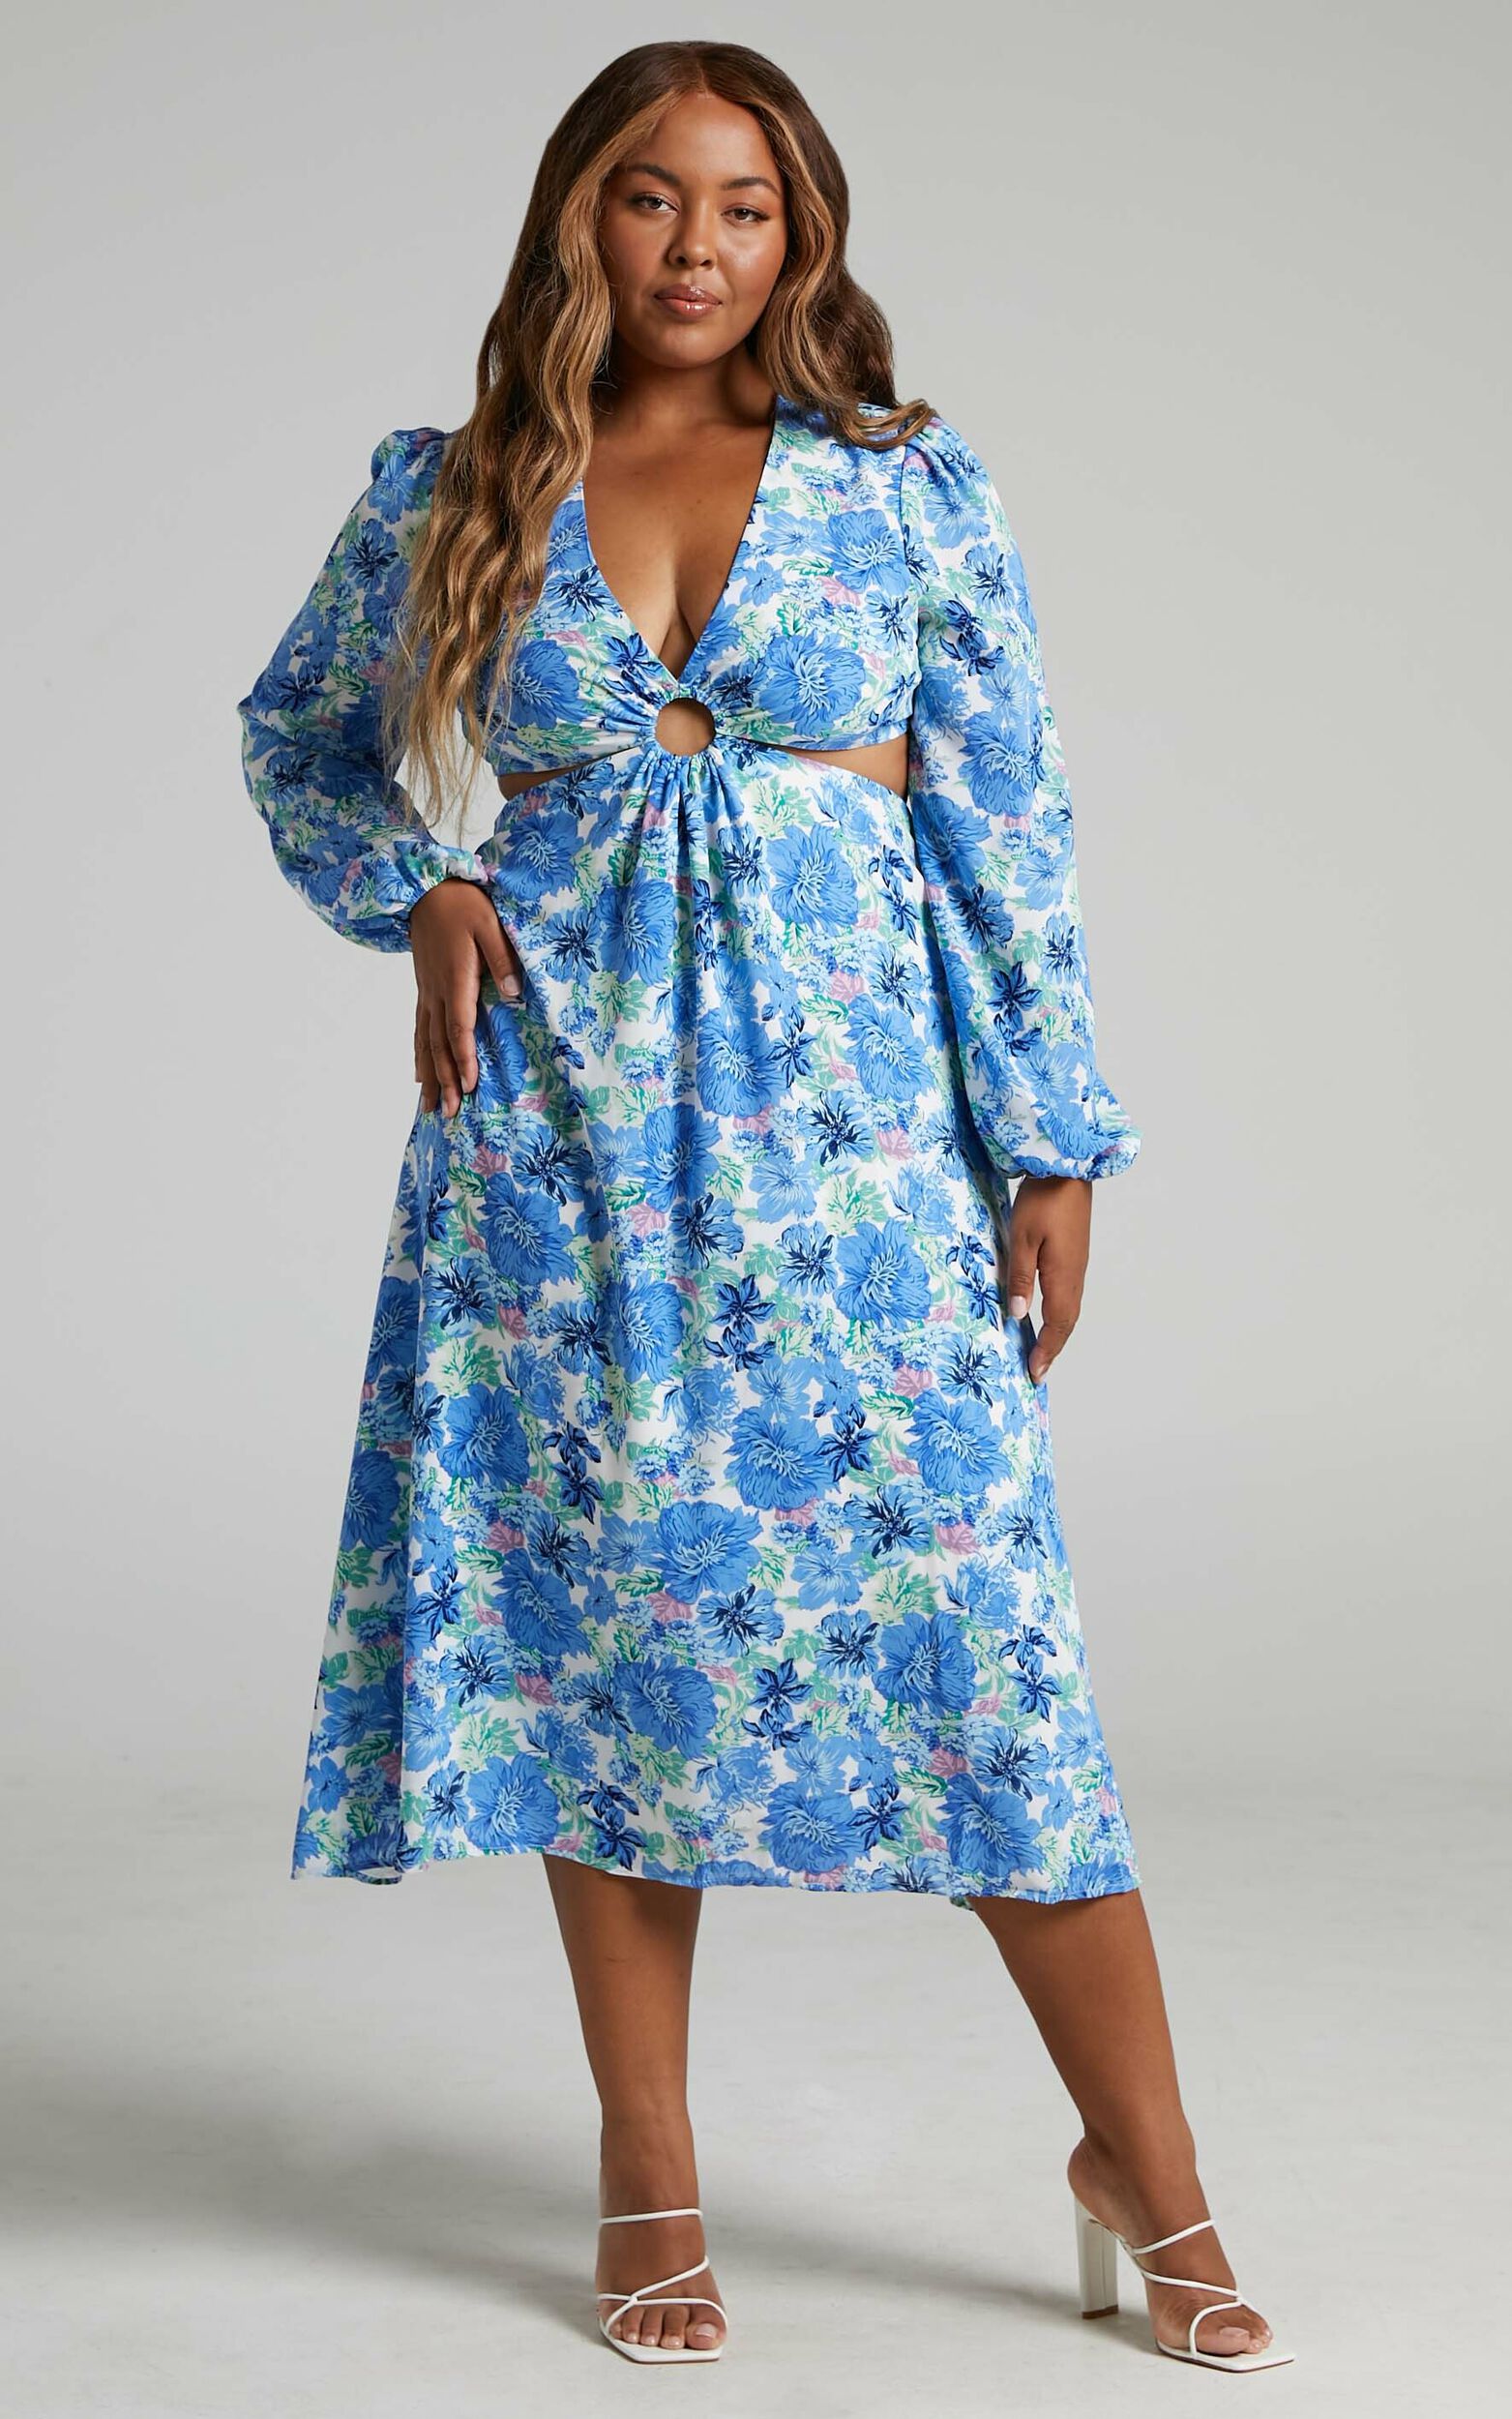 Geneve Ring Cut Out Long Sleeve Midi Dress in Geneve Blue Floral - 04, MLT1